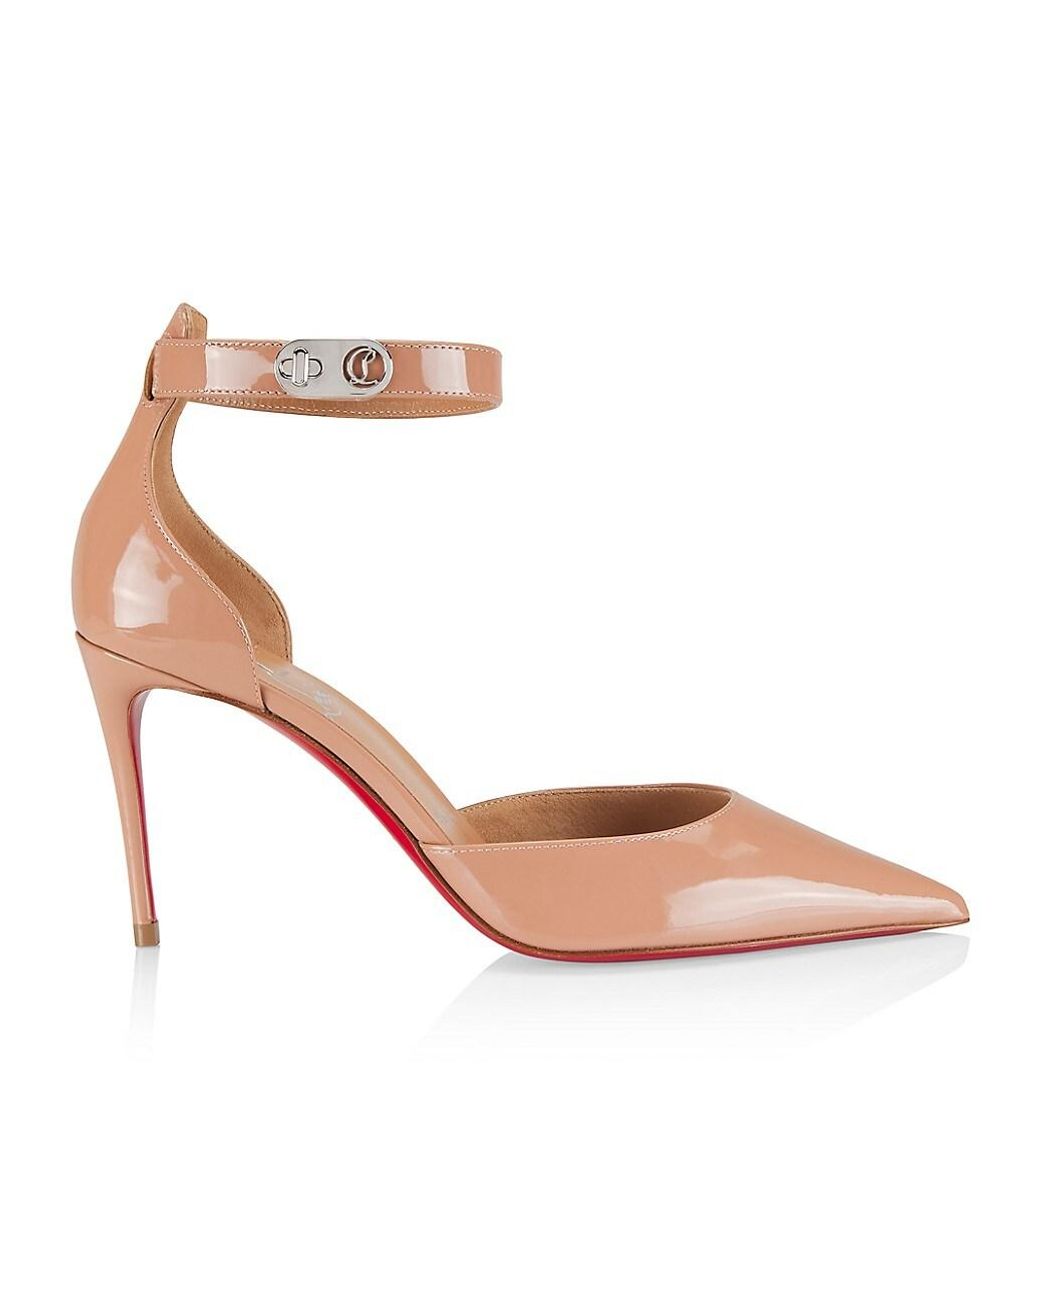 Christian Louboutin Beige Patent Leather Highness Peep Toe